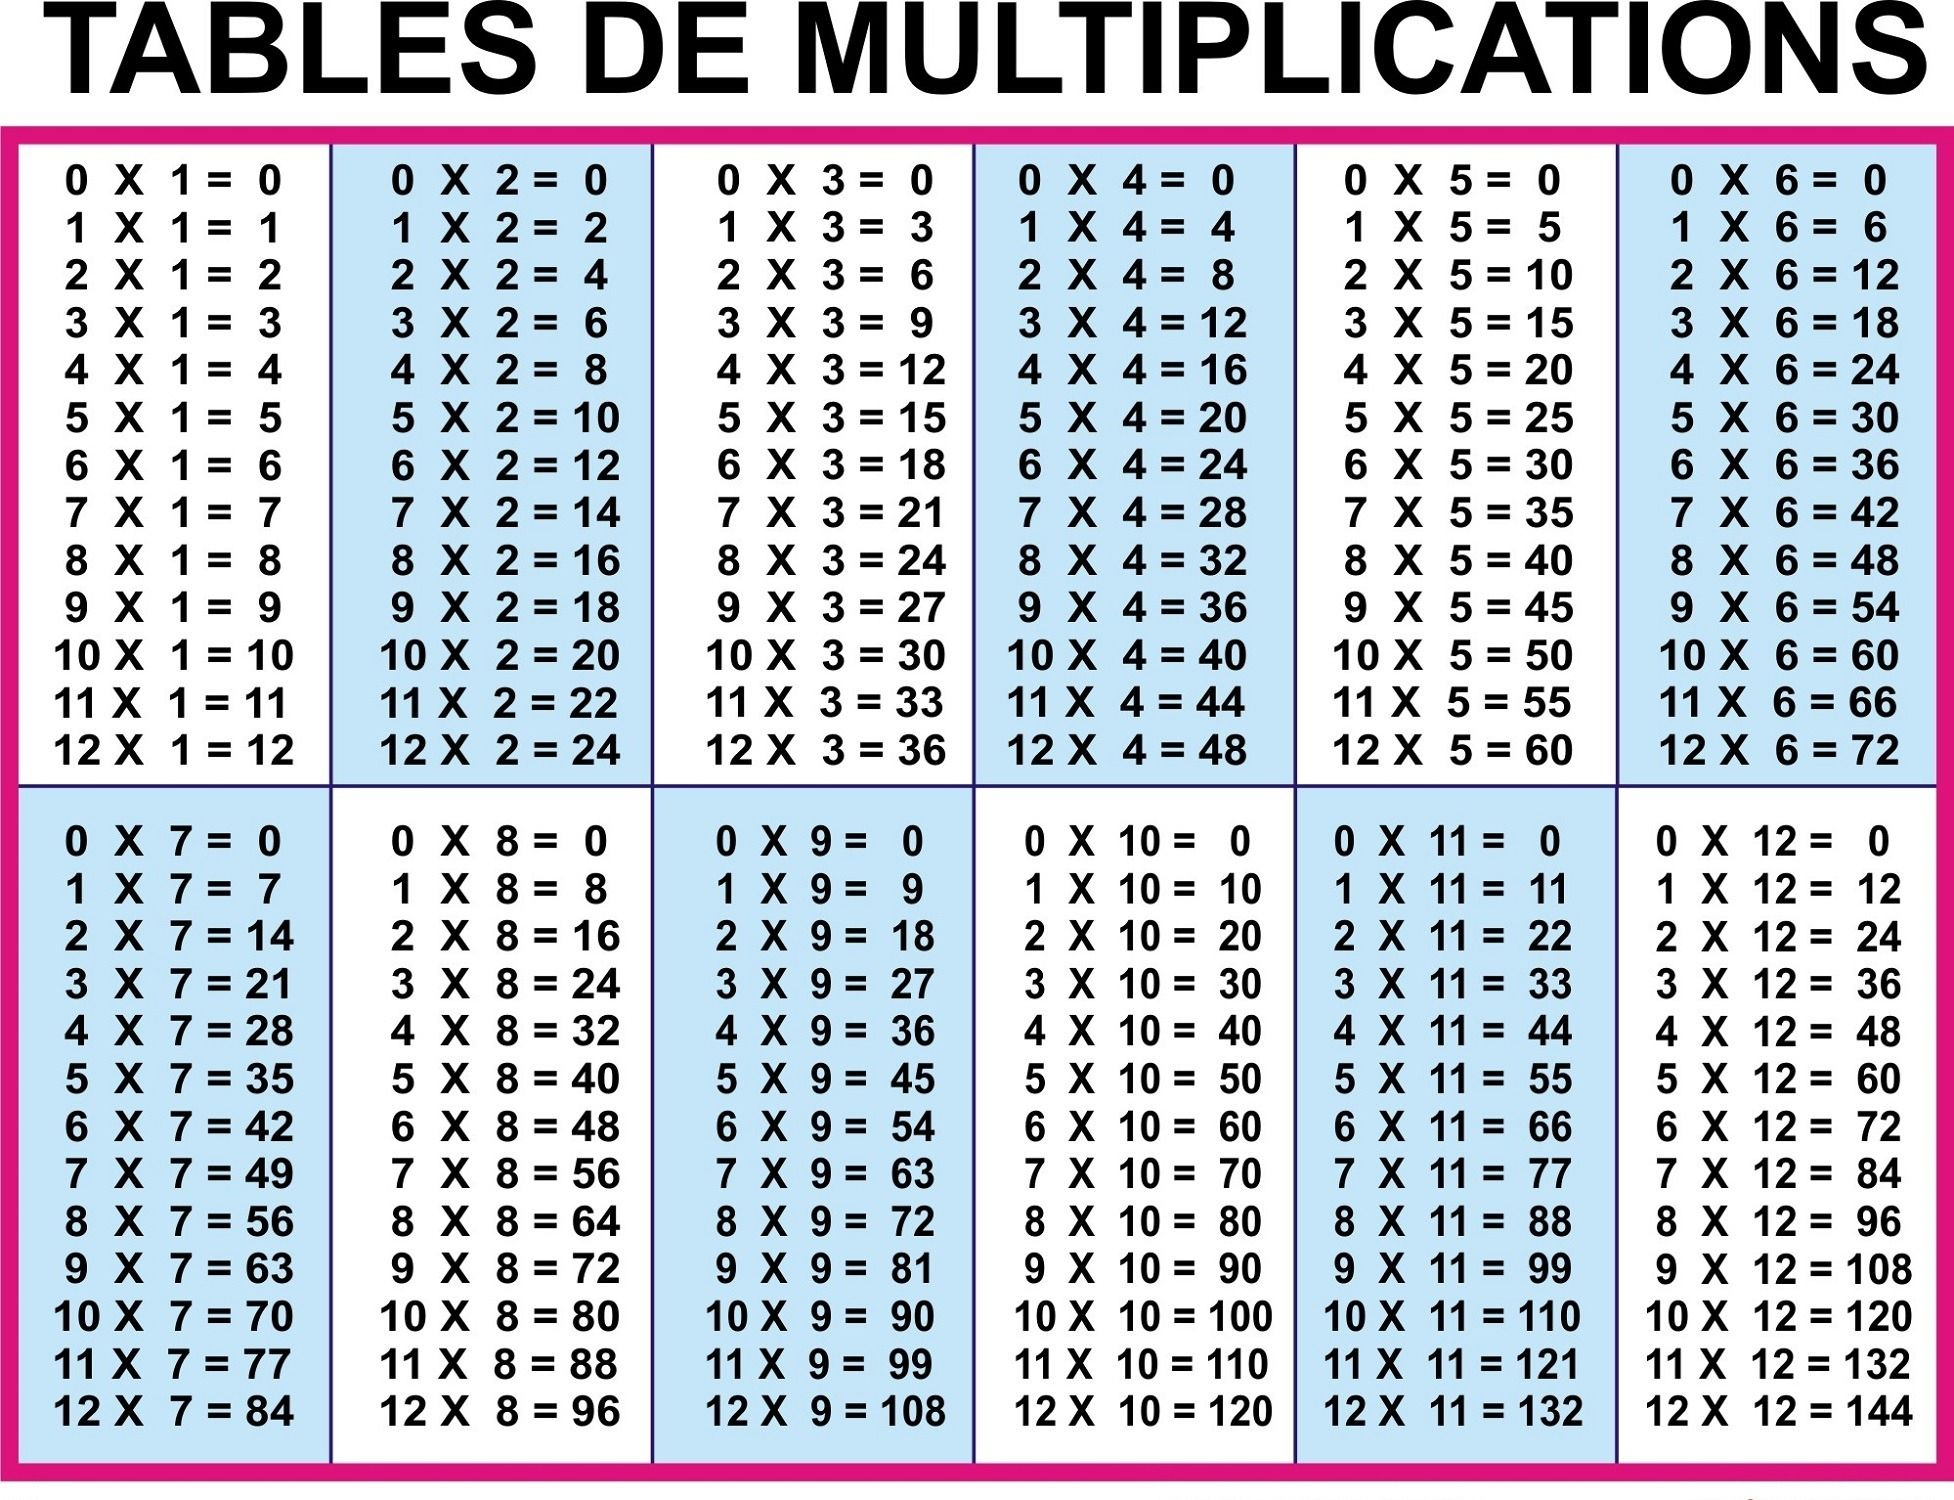 Clear It Multiplication